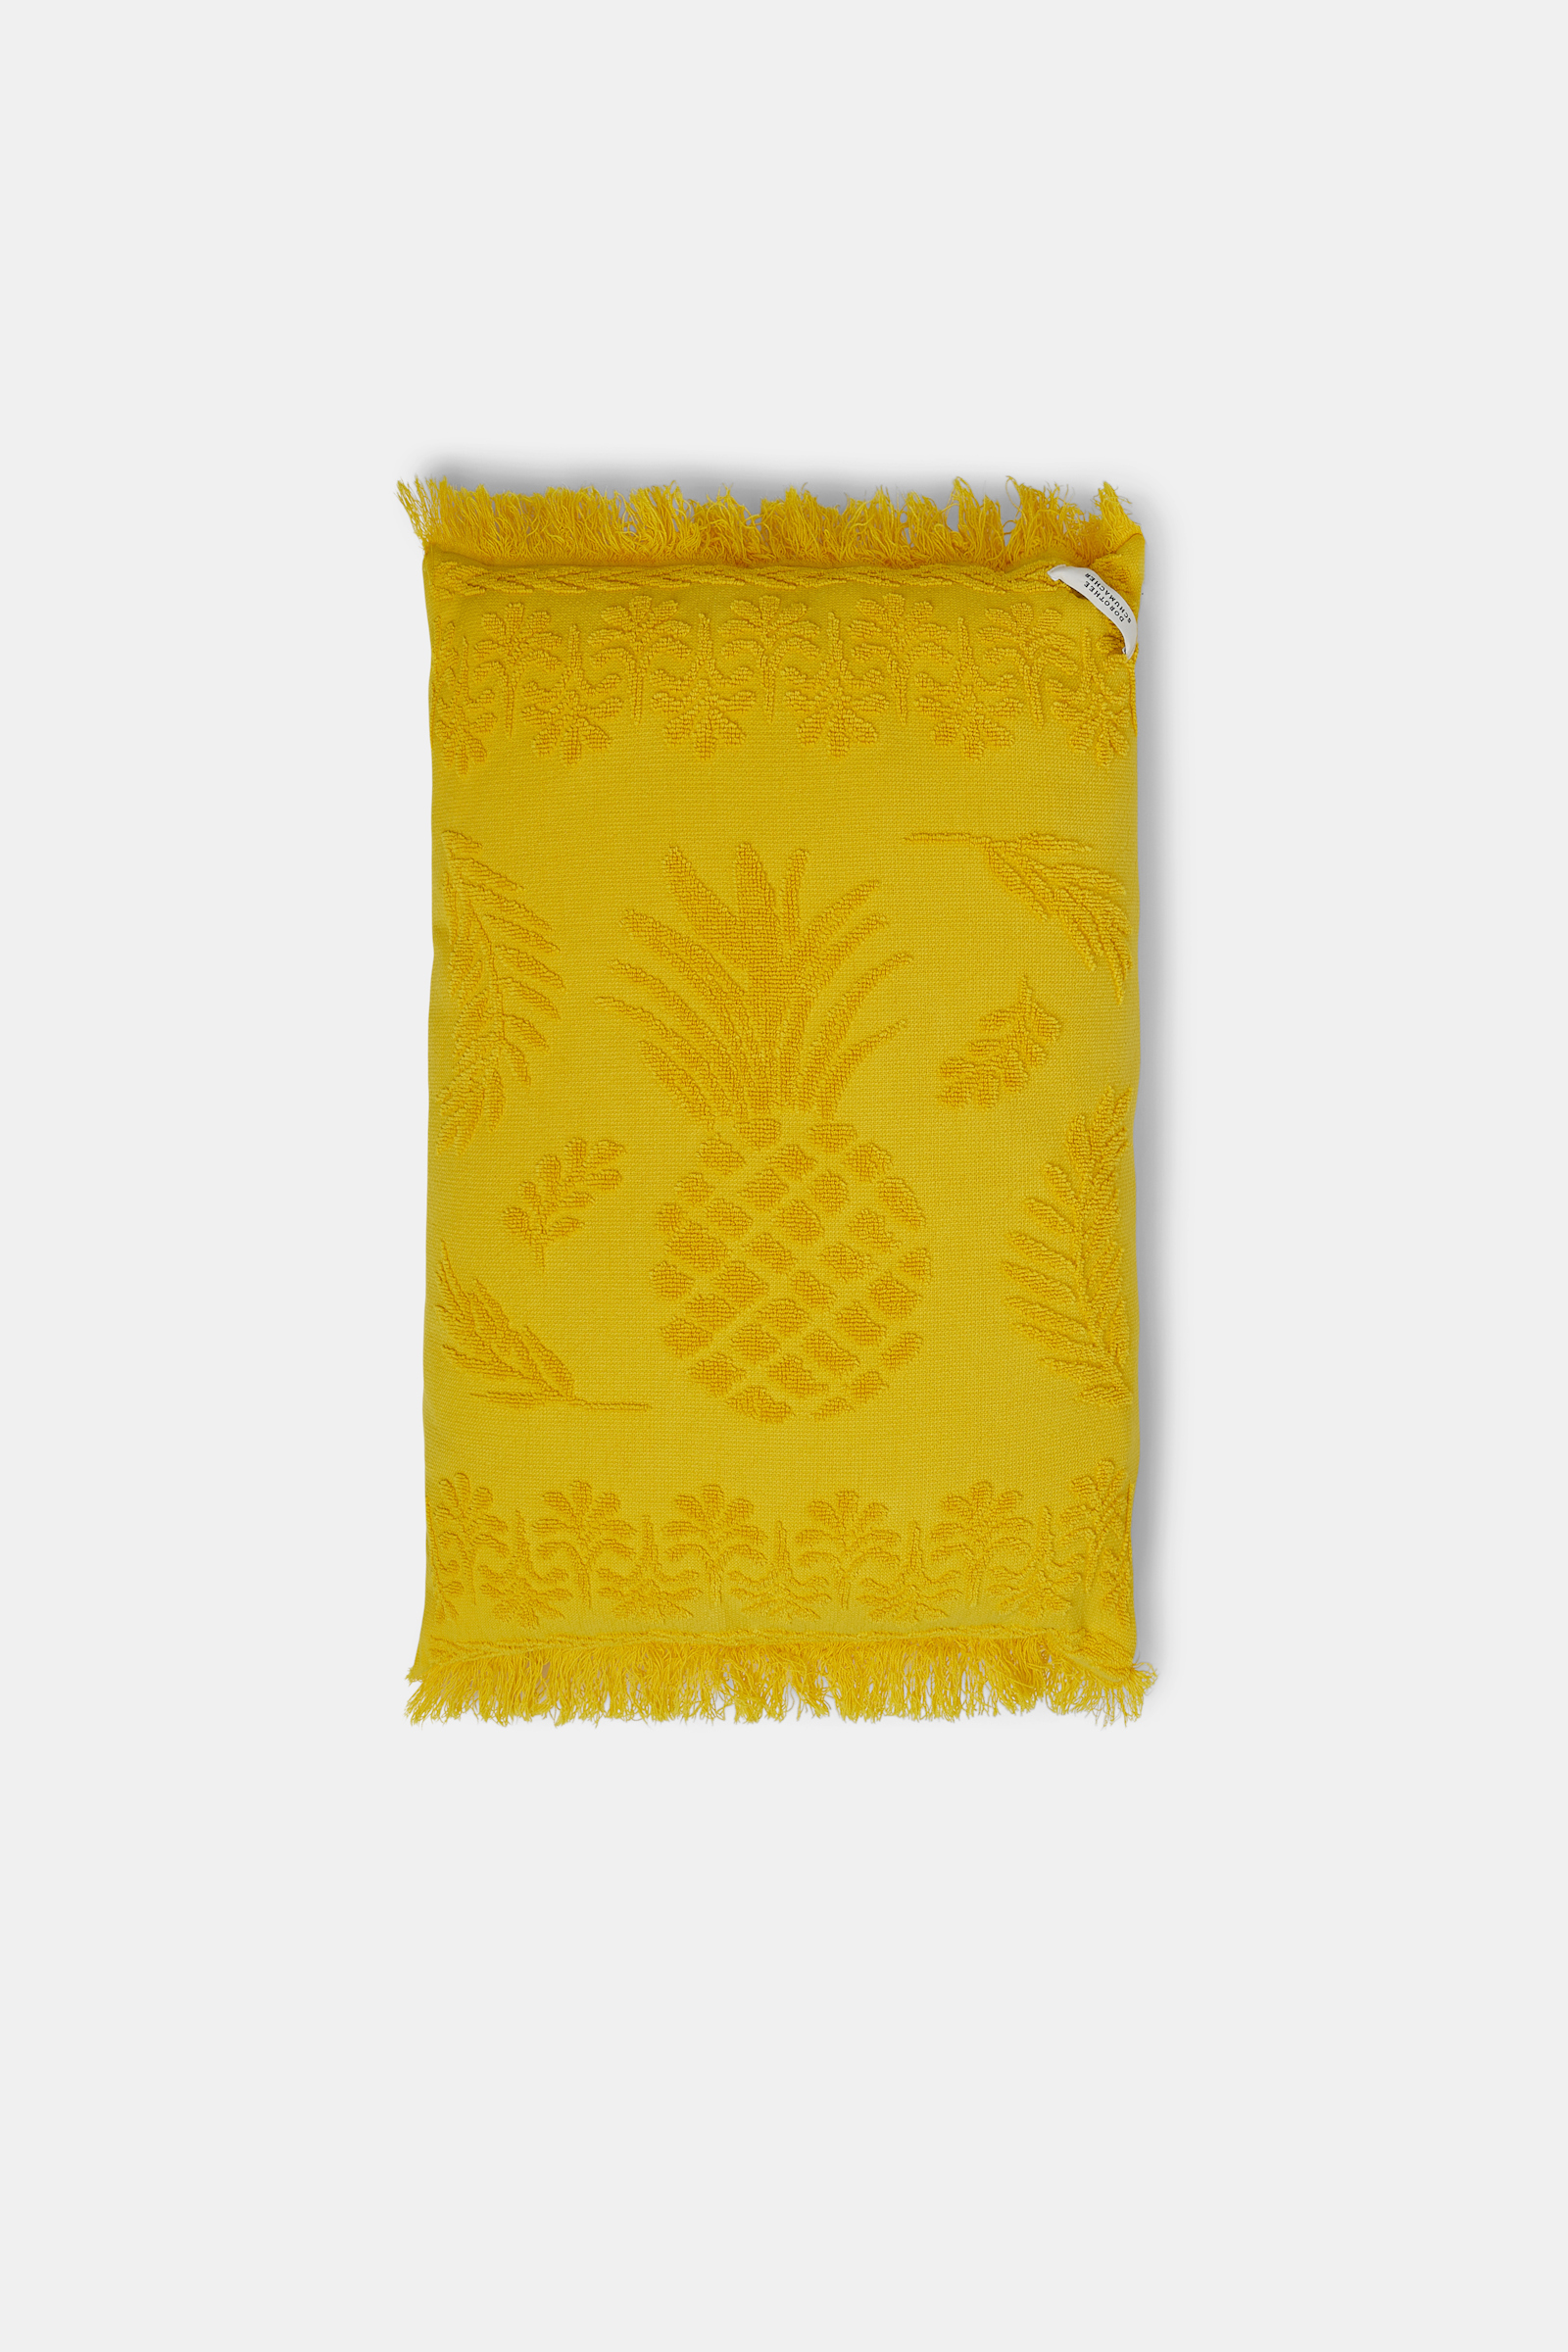 Dorothee Schumacher Cotton pillow with woven jacquard pineapple pattern soft yellow